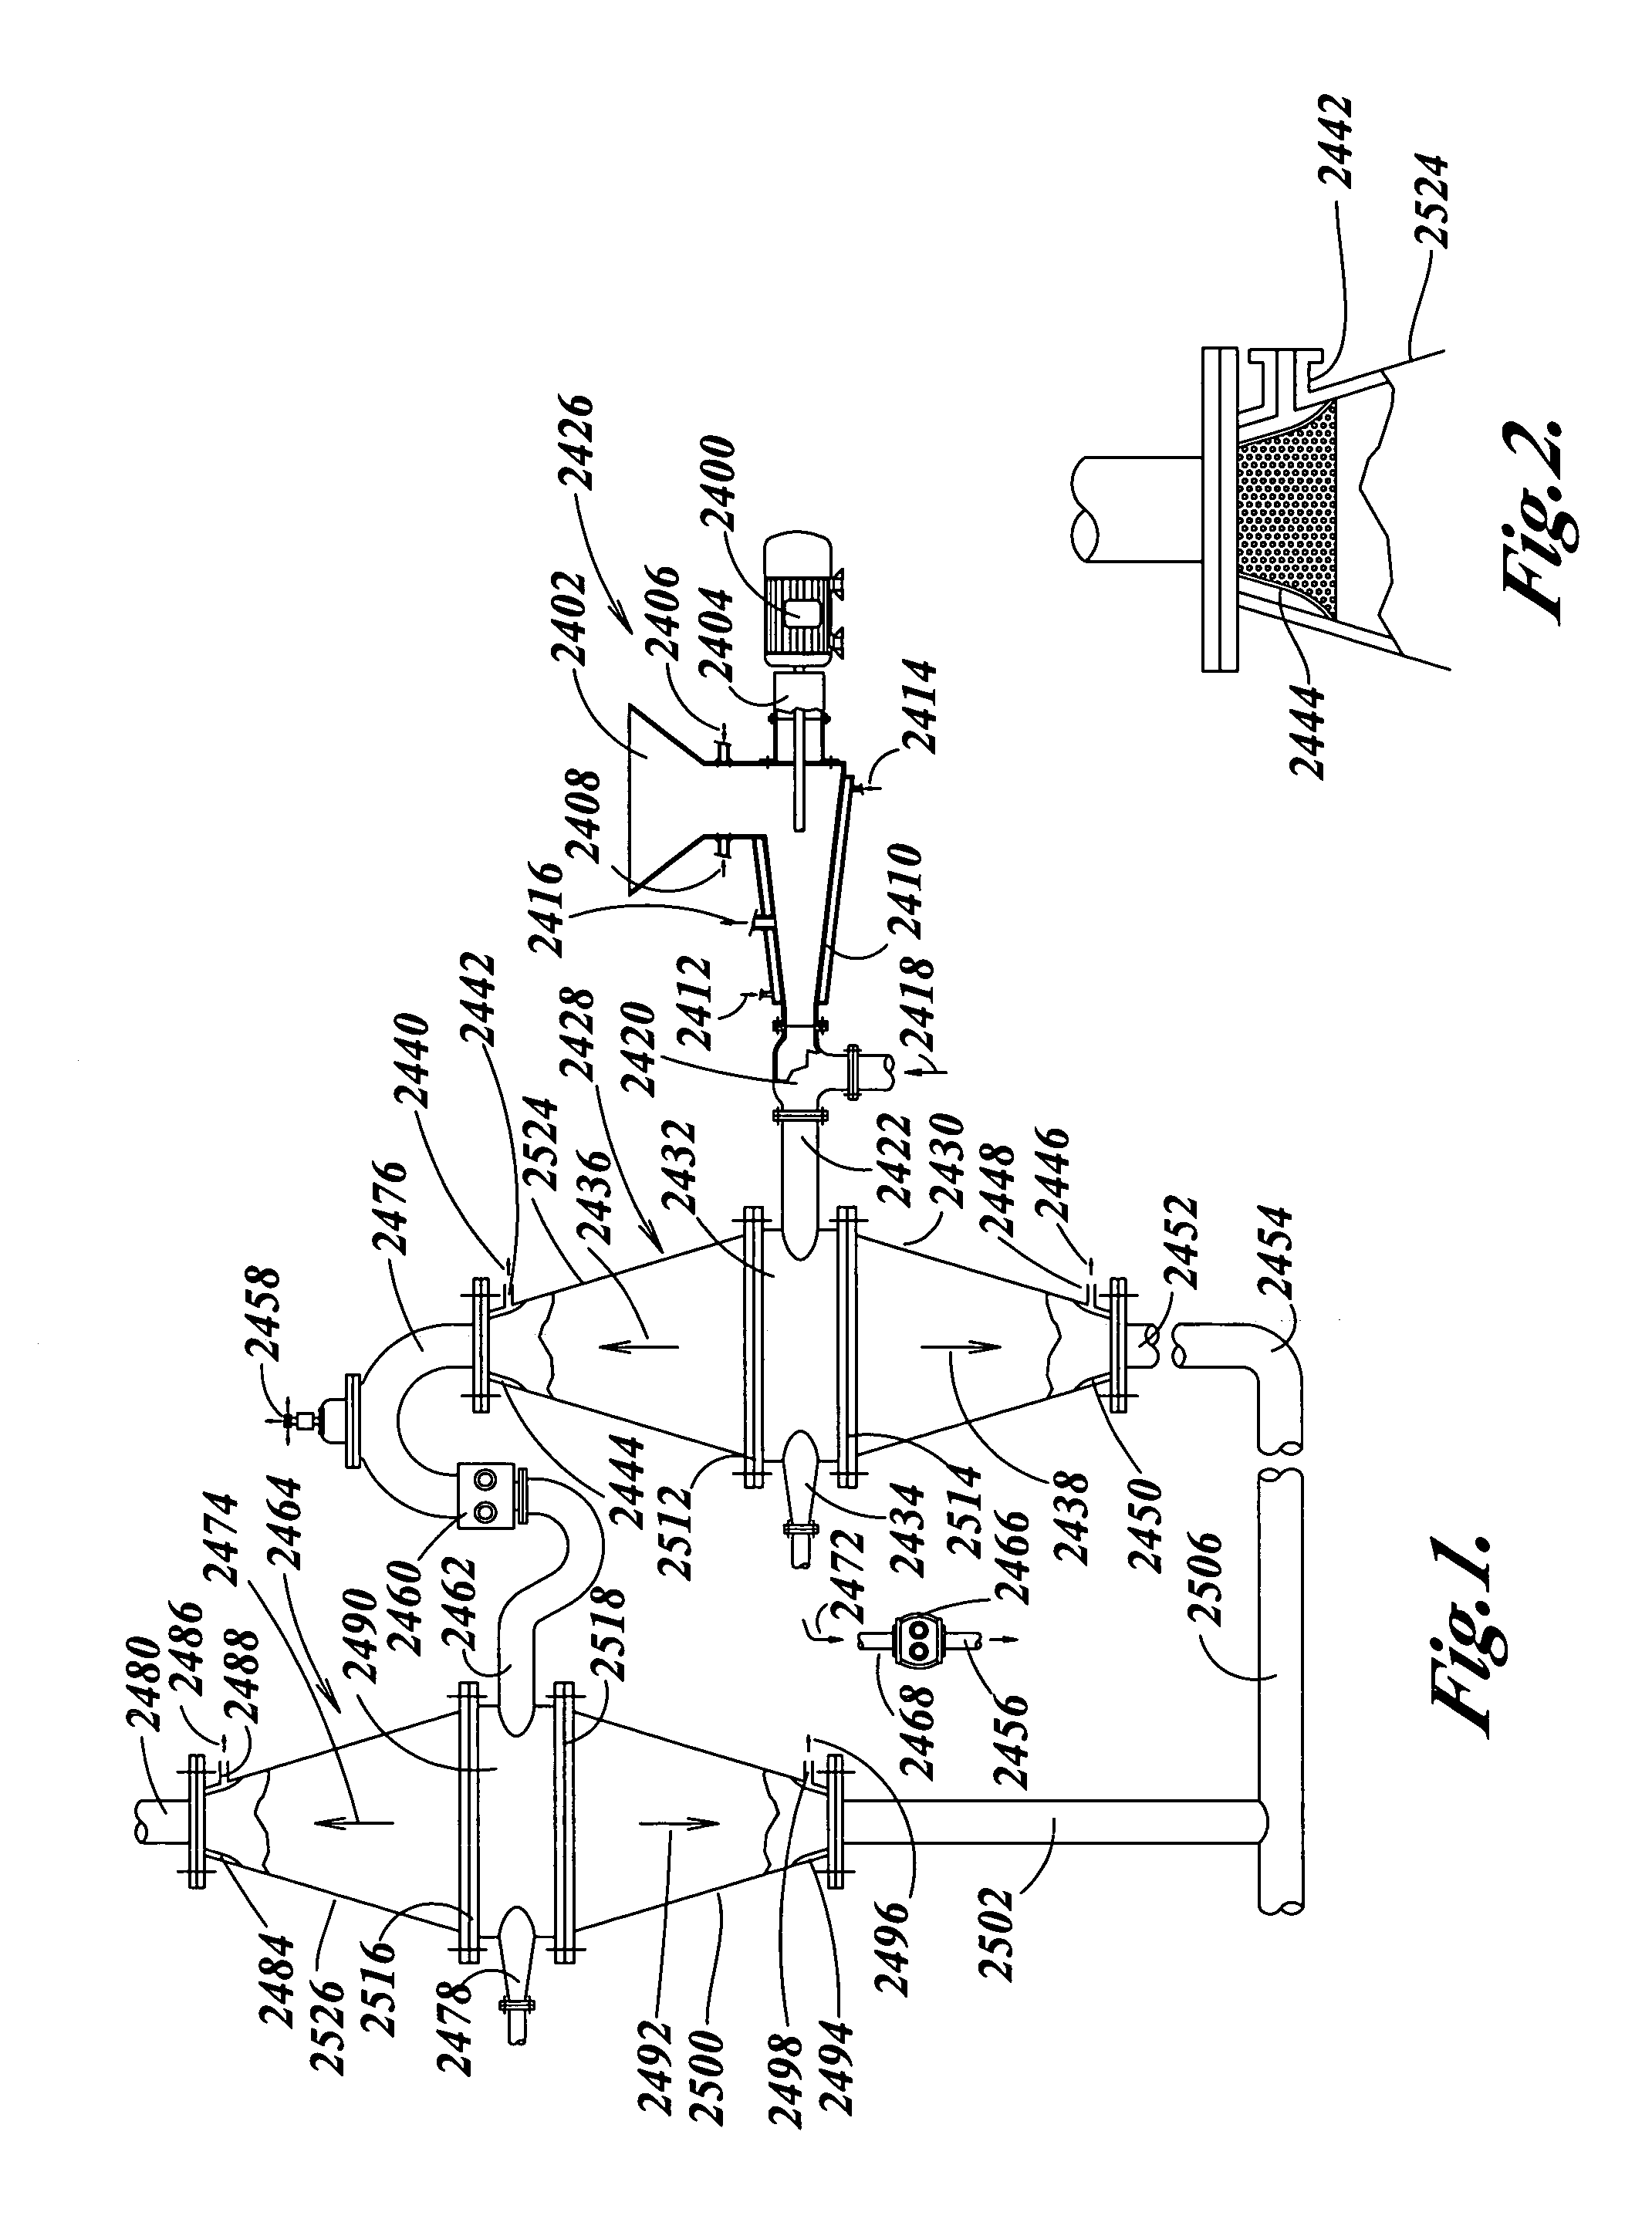 Methods for separating tallow from boneless beef using liquid carbon dioxide and carbonic acid